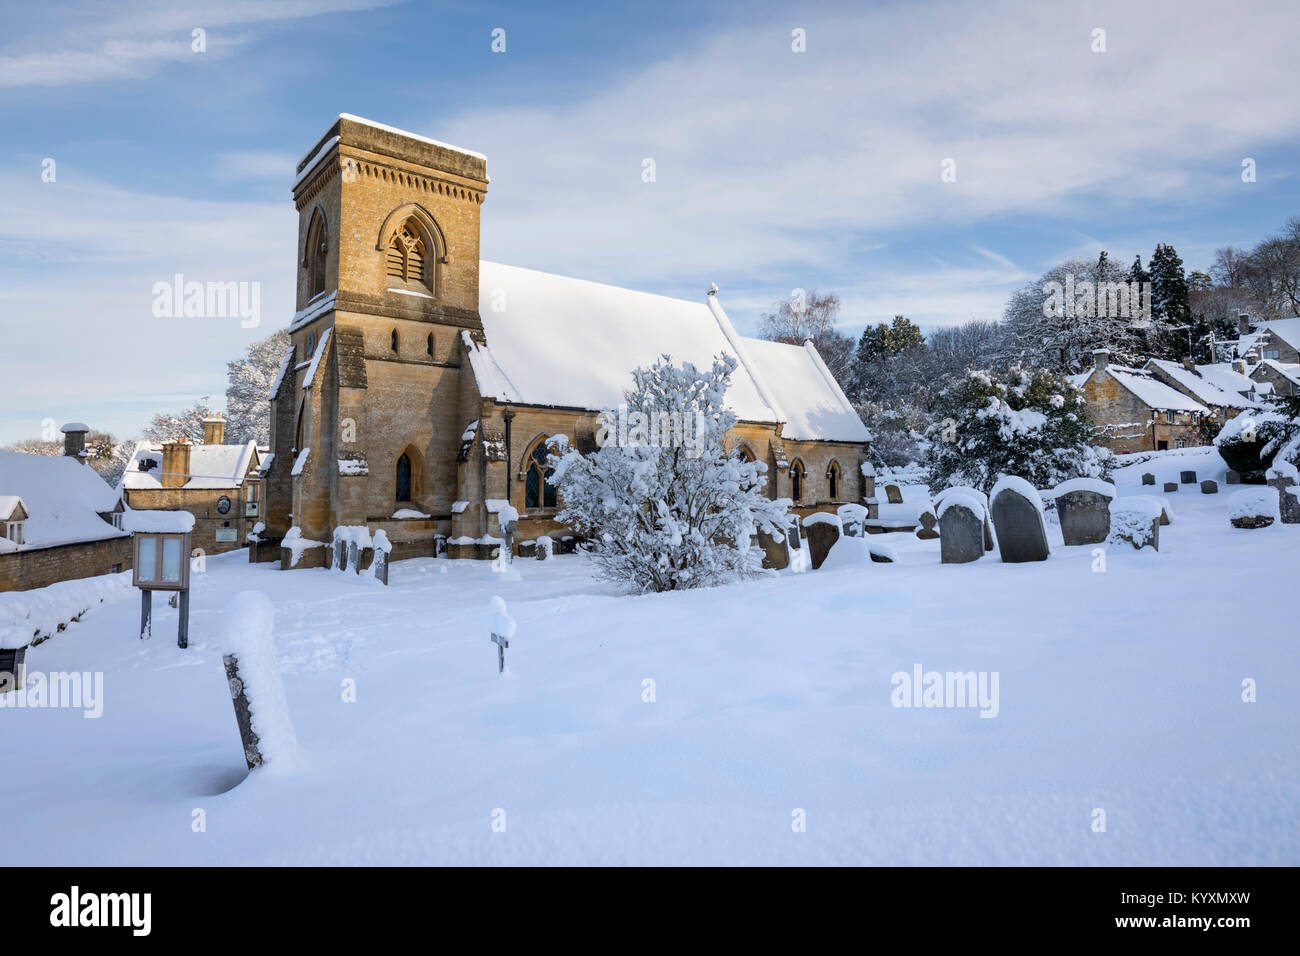 St Barnabas Church in winter snow, Snowshill, Cotswolds, Gloucestershire, England, United Kingdom, Europe Stock Photo